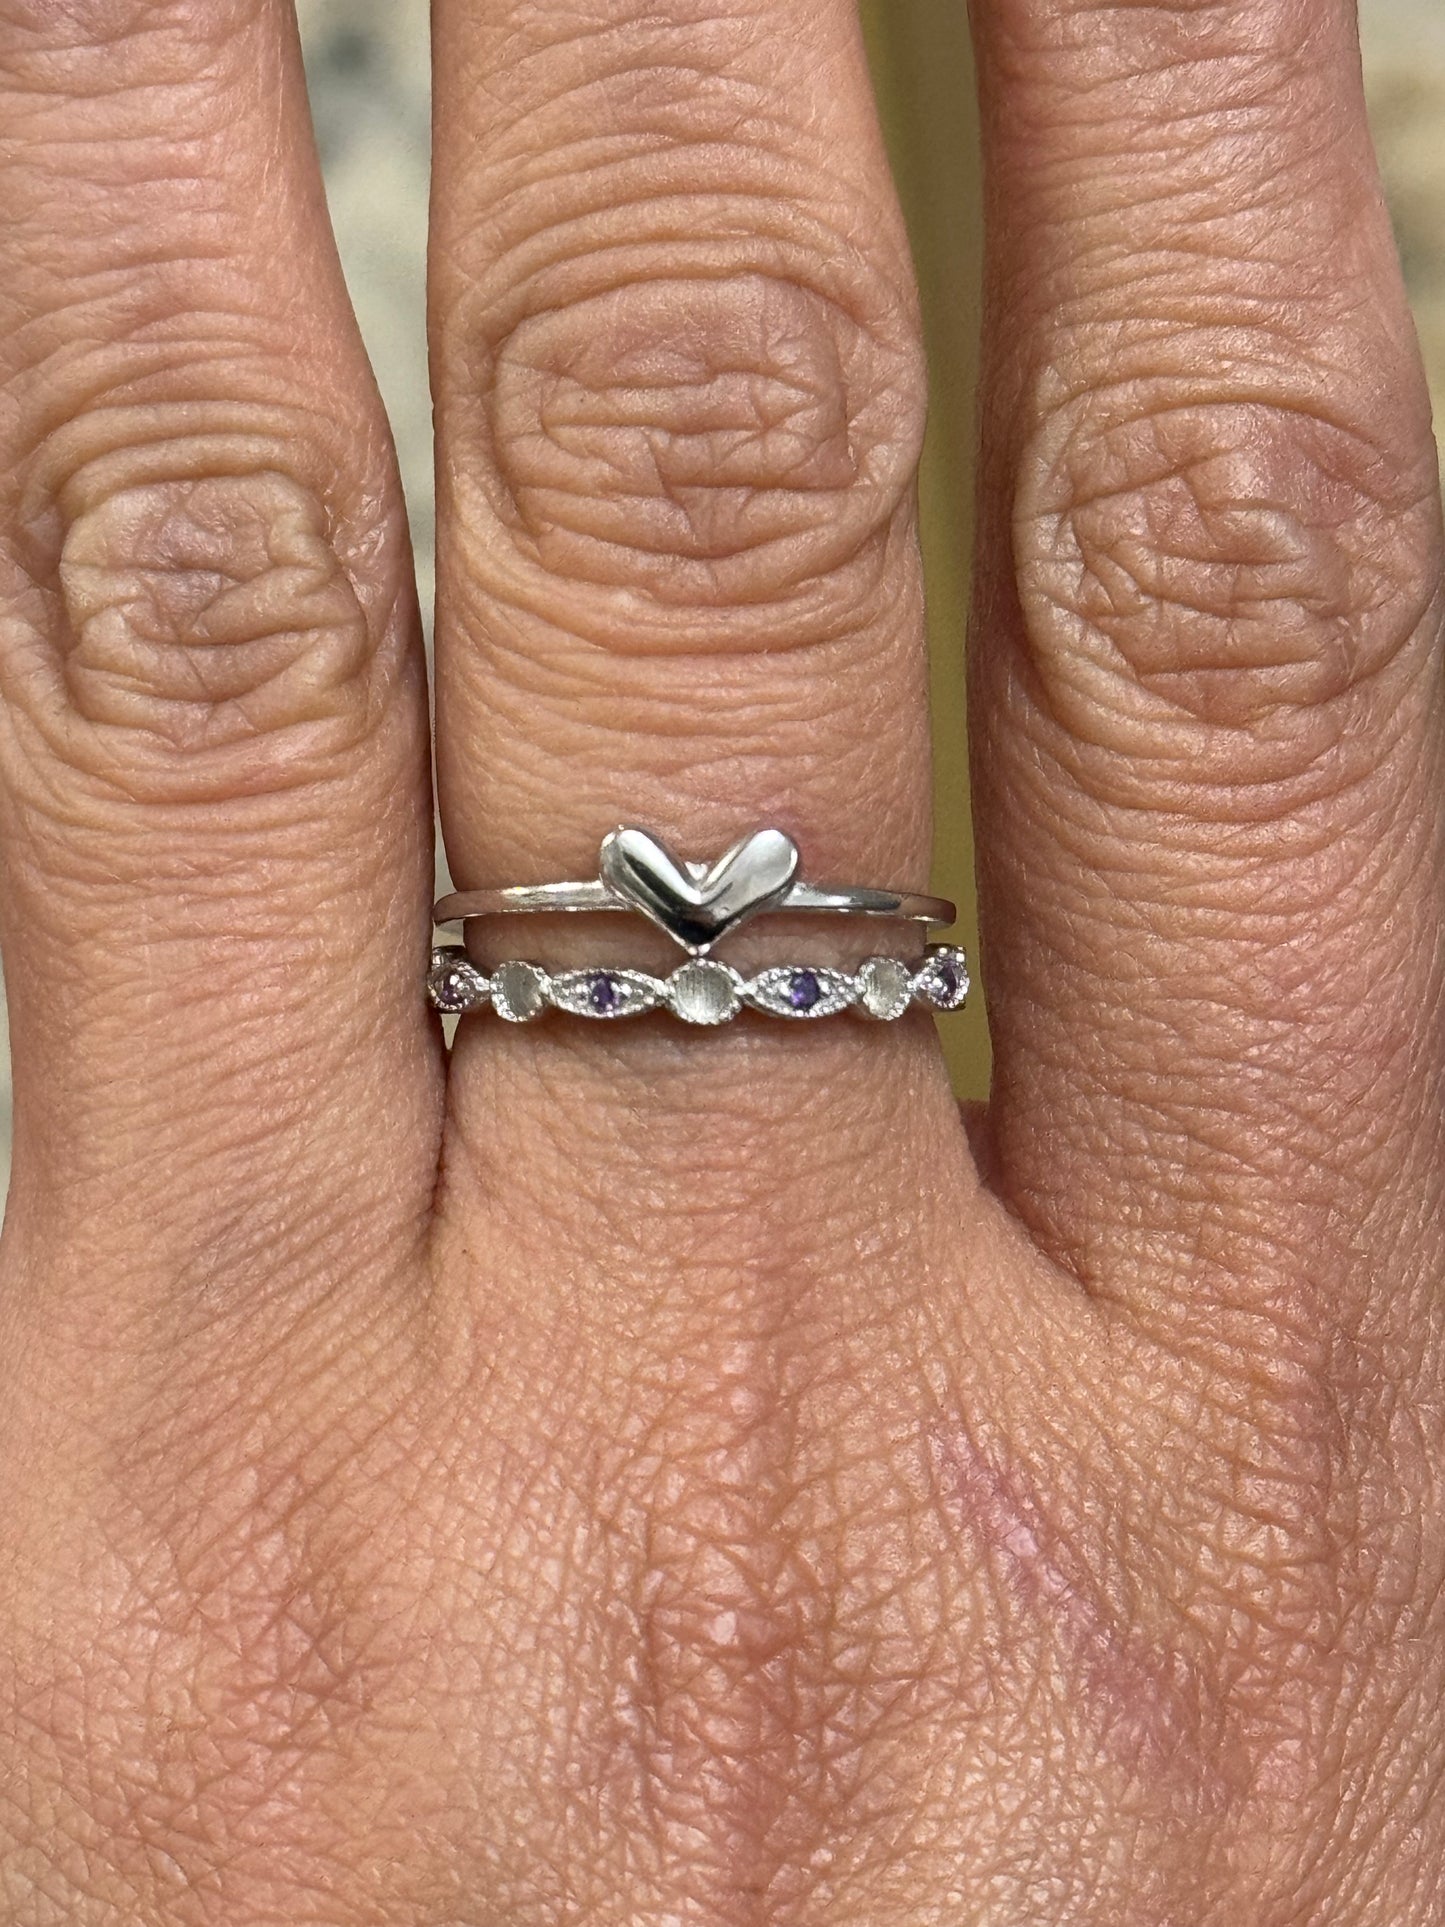 Such a cute ring set!
Queen stacker with June or Feb stones (can pass for either)
Size about 6.5 

$155 for both